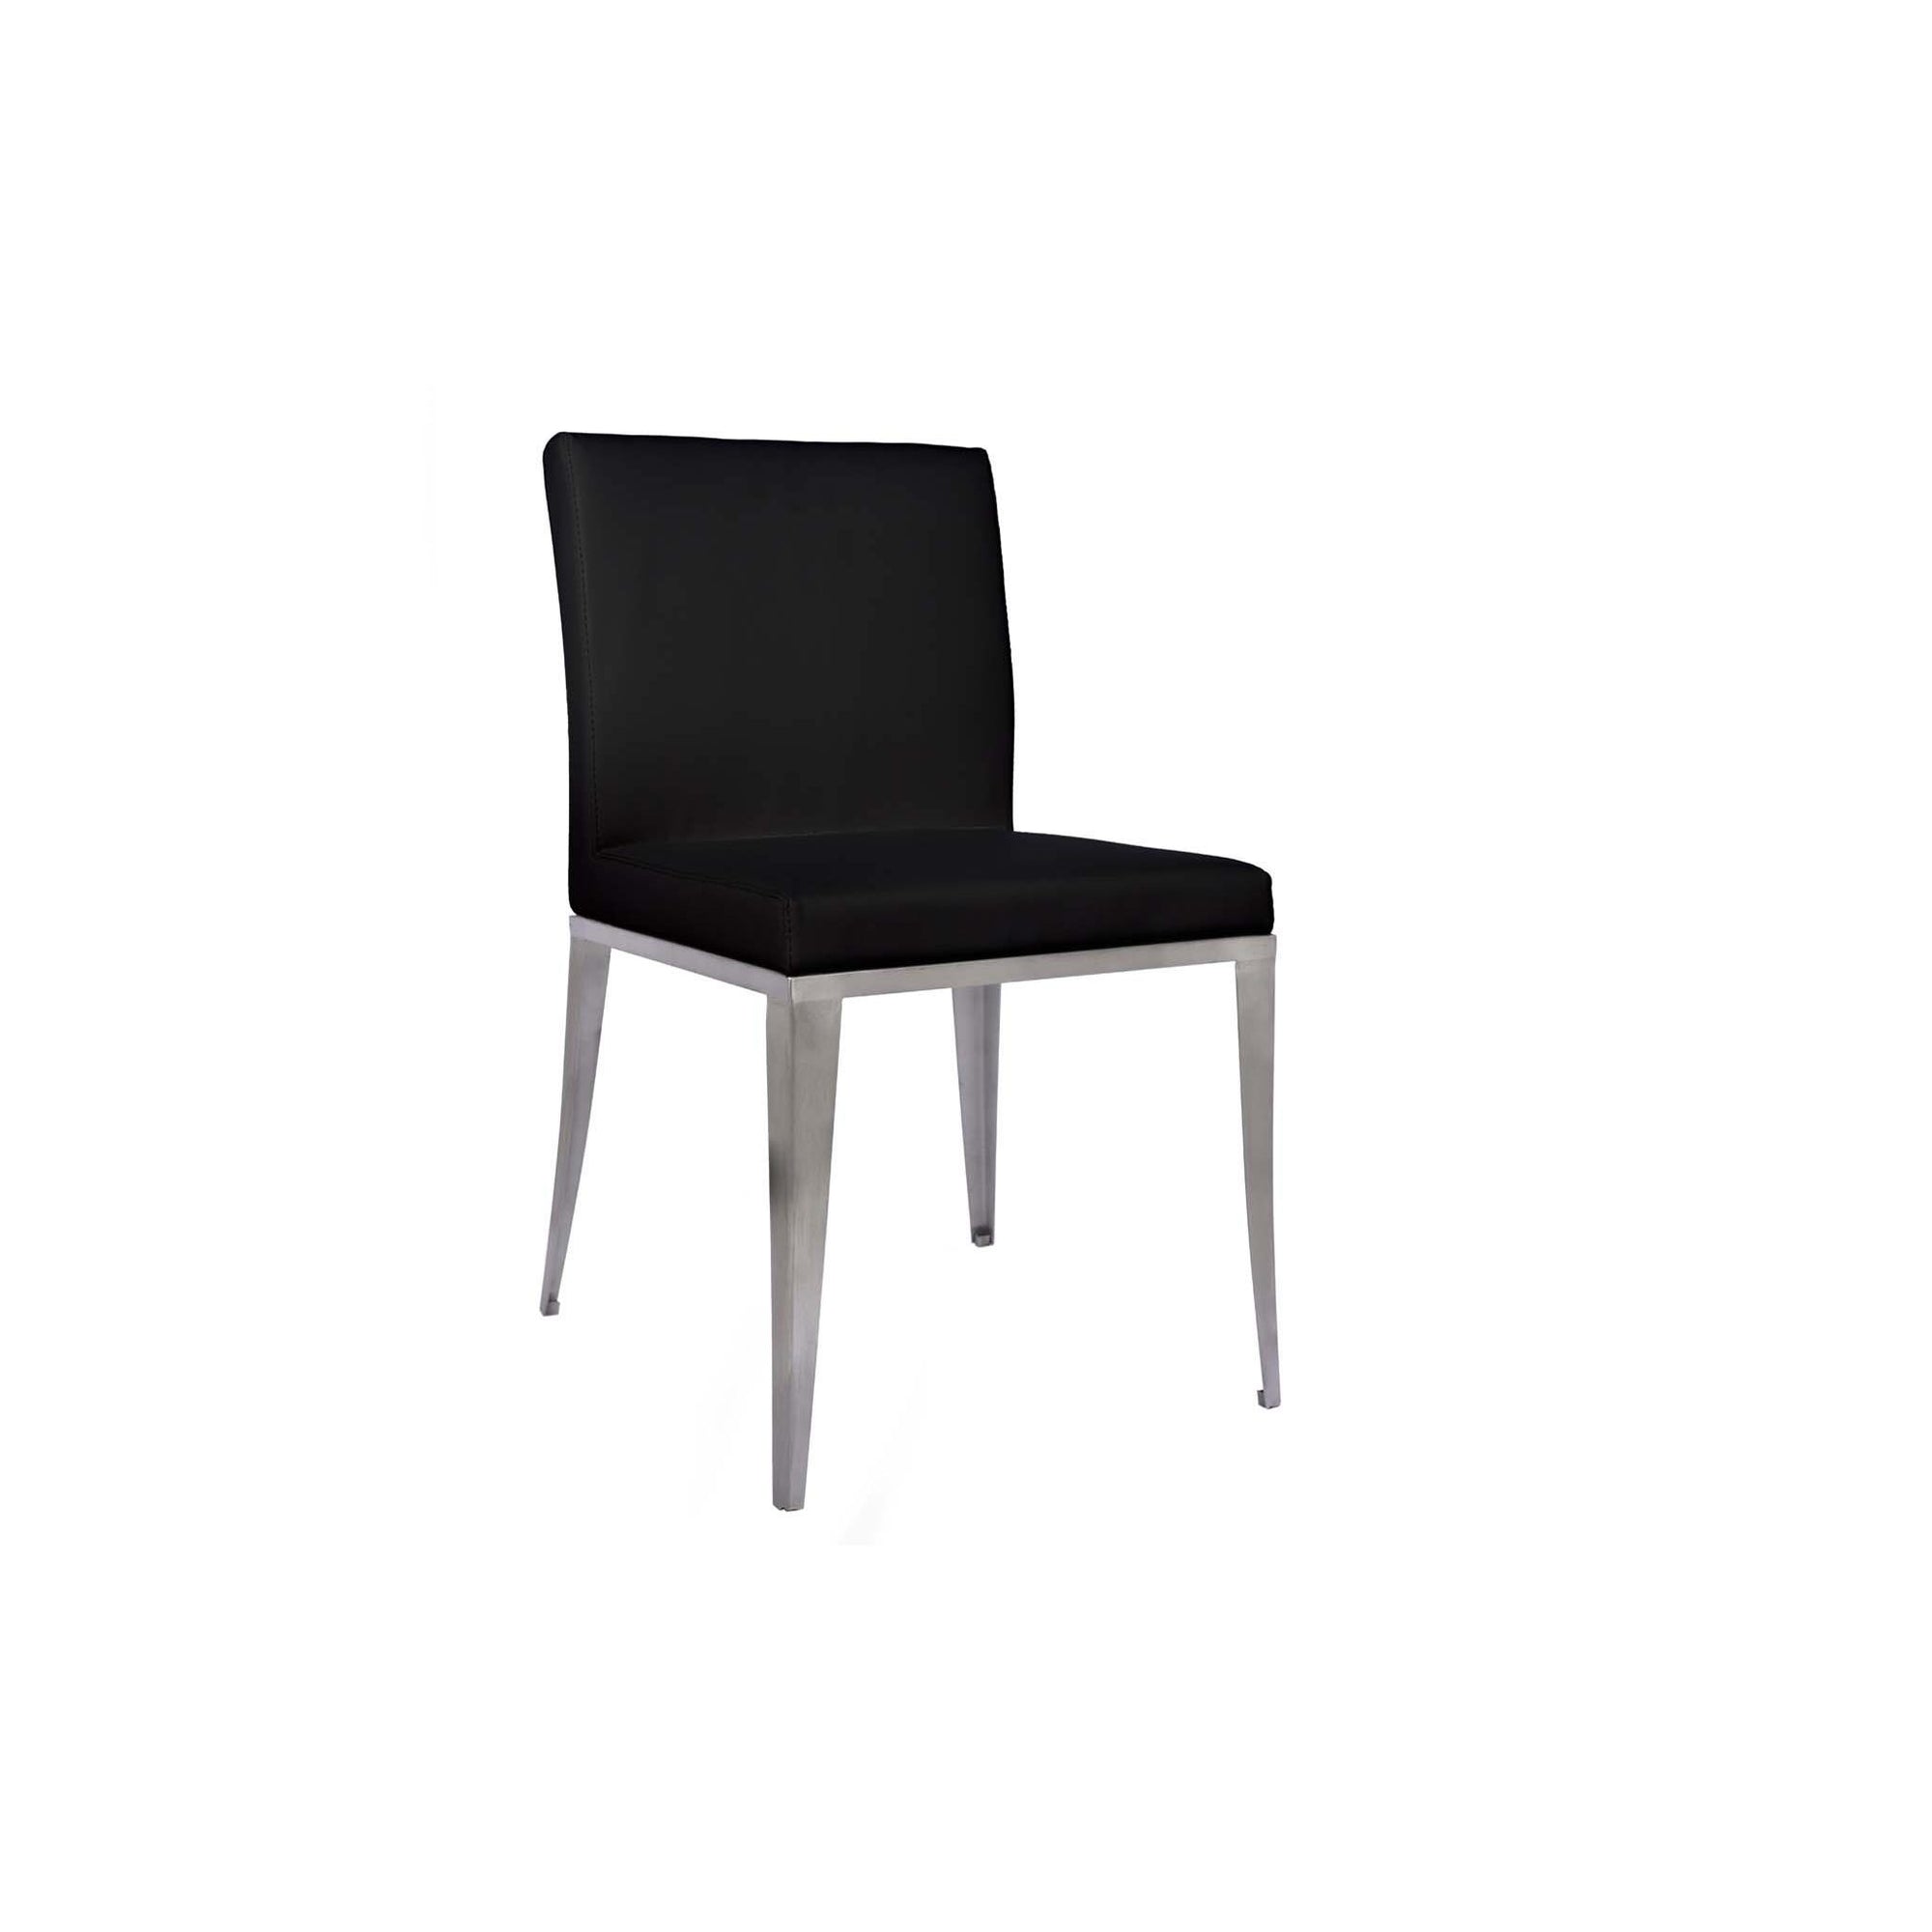 Bellini-1008 Dining Chair-Dining Chairs-MODTEMPO